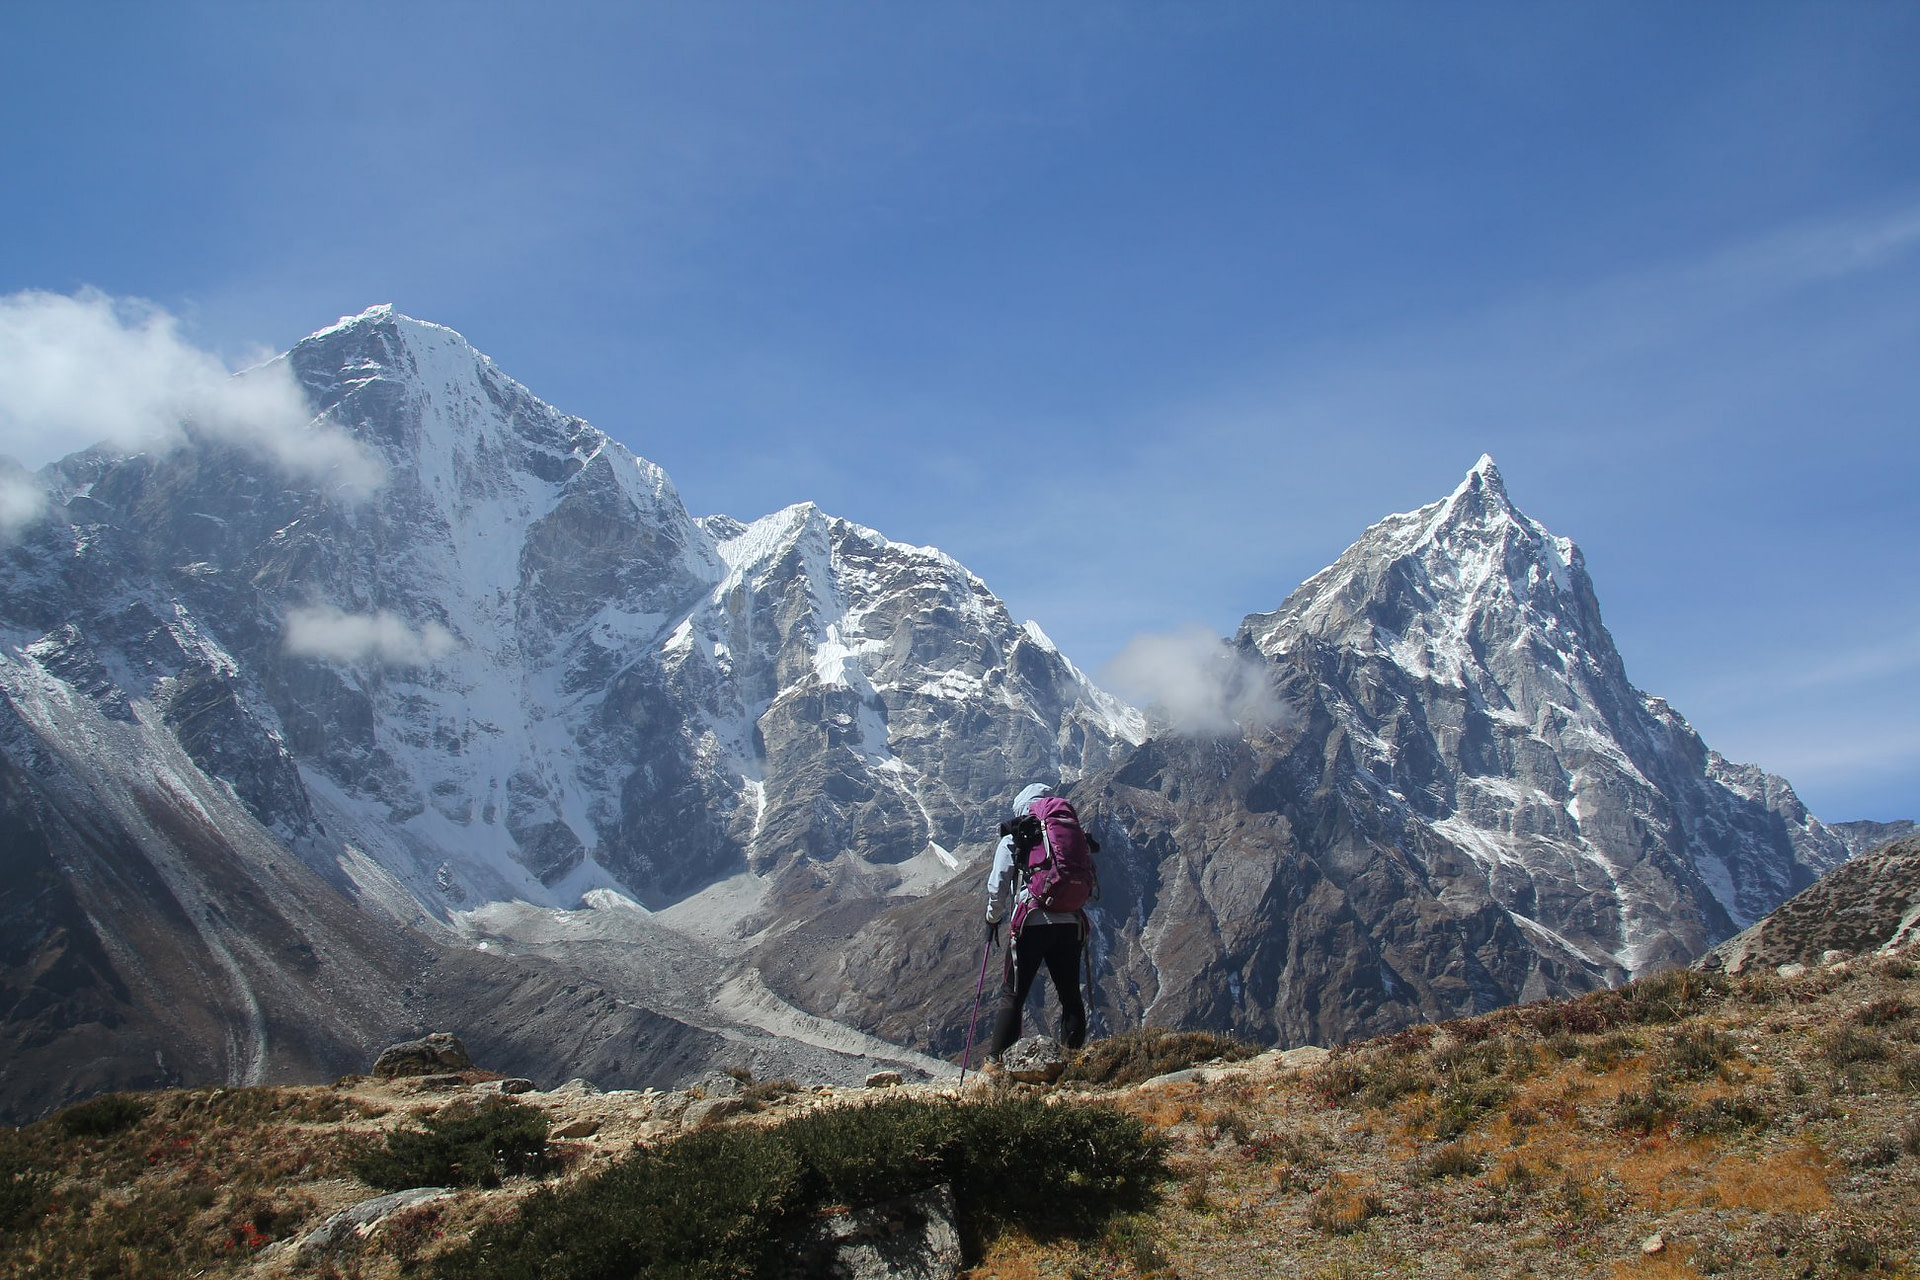 12 things to know before trekking to Everest base camp - One and Half